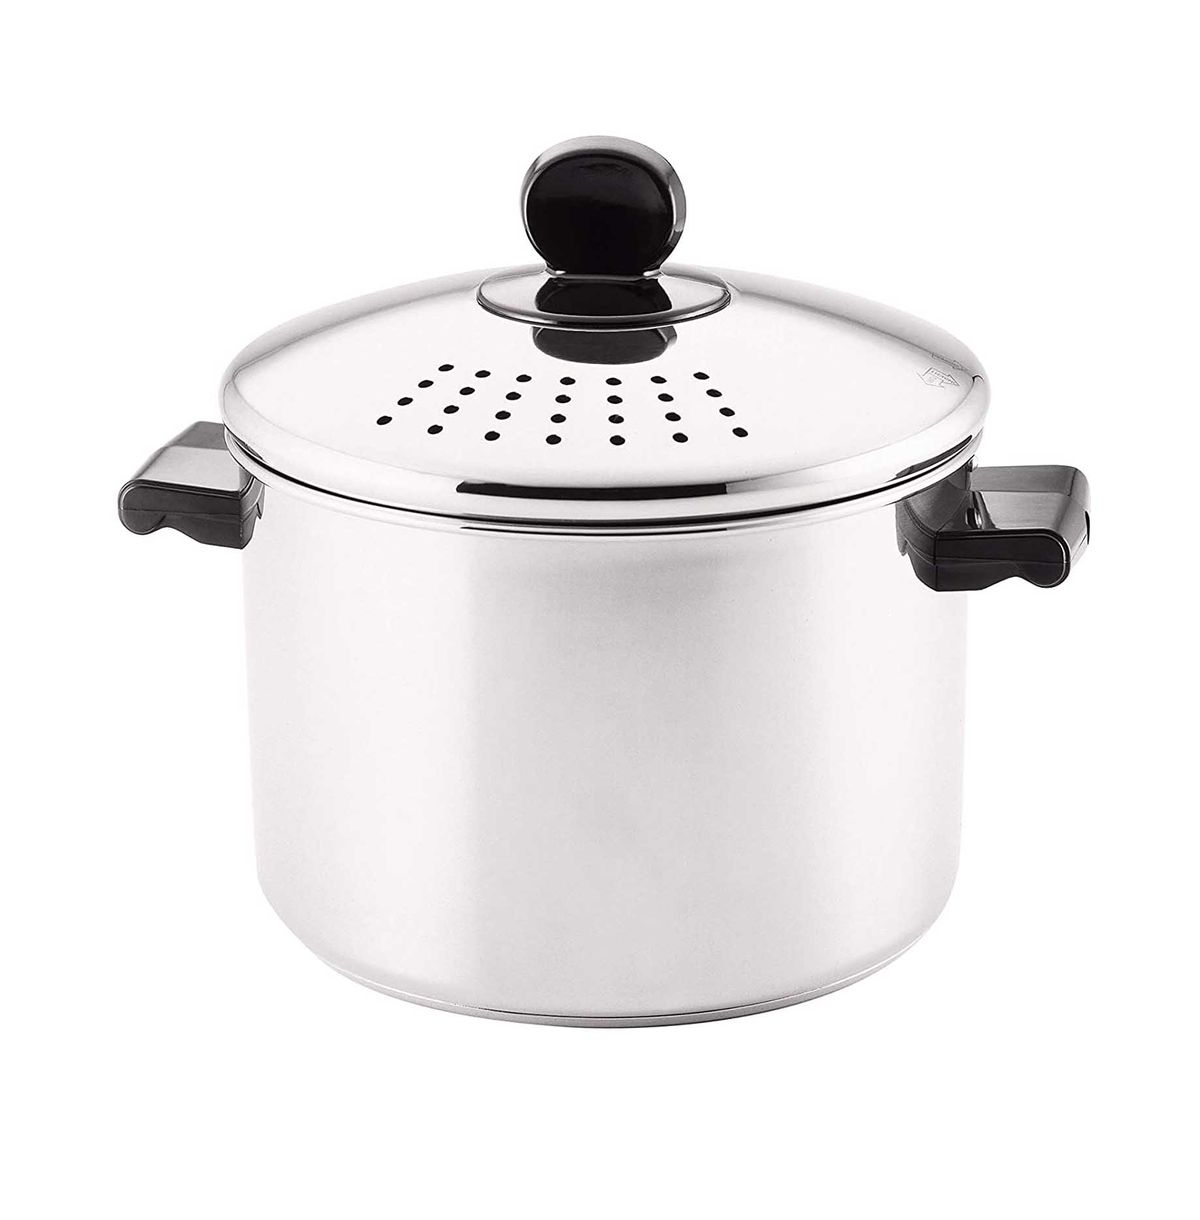 Farberware Classic Series Stainless Steel 8-Quart Covered Straining Stockpot with Lid